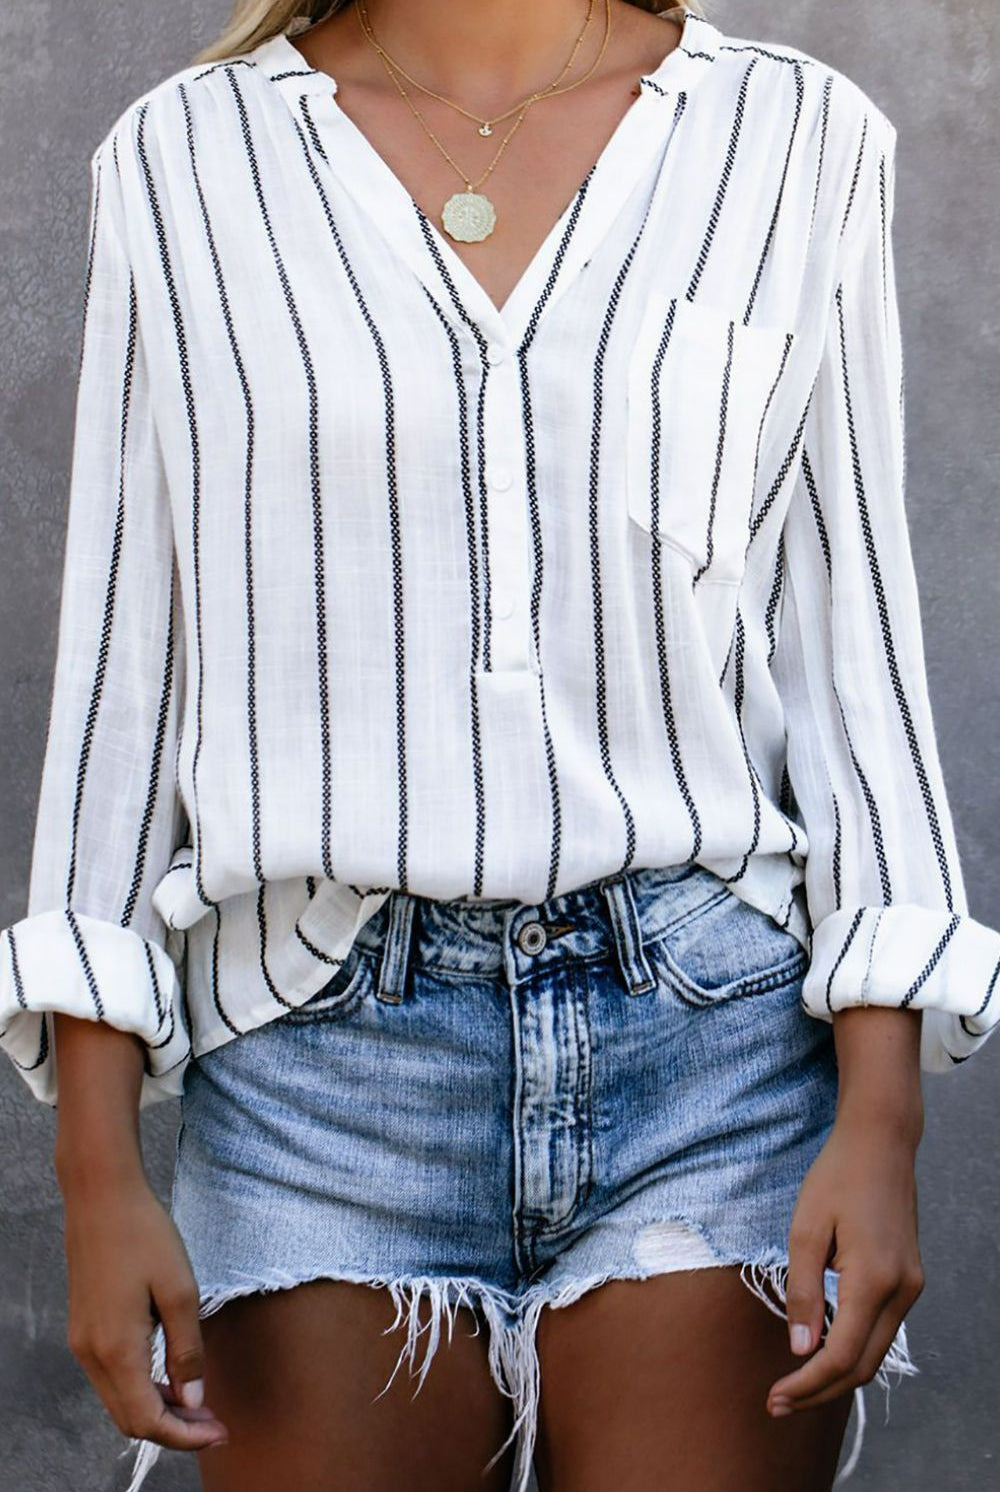 Light Gray Shine Through Striped V-Neck High-Low Shirt with Breast Pocket Shirts & Tops